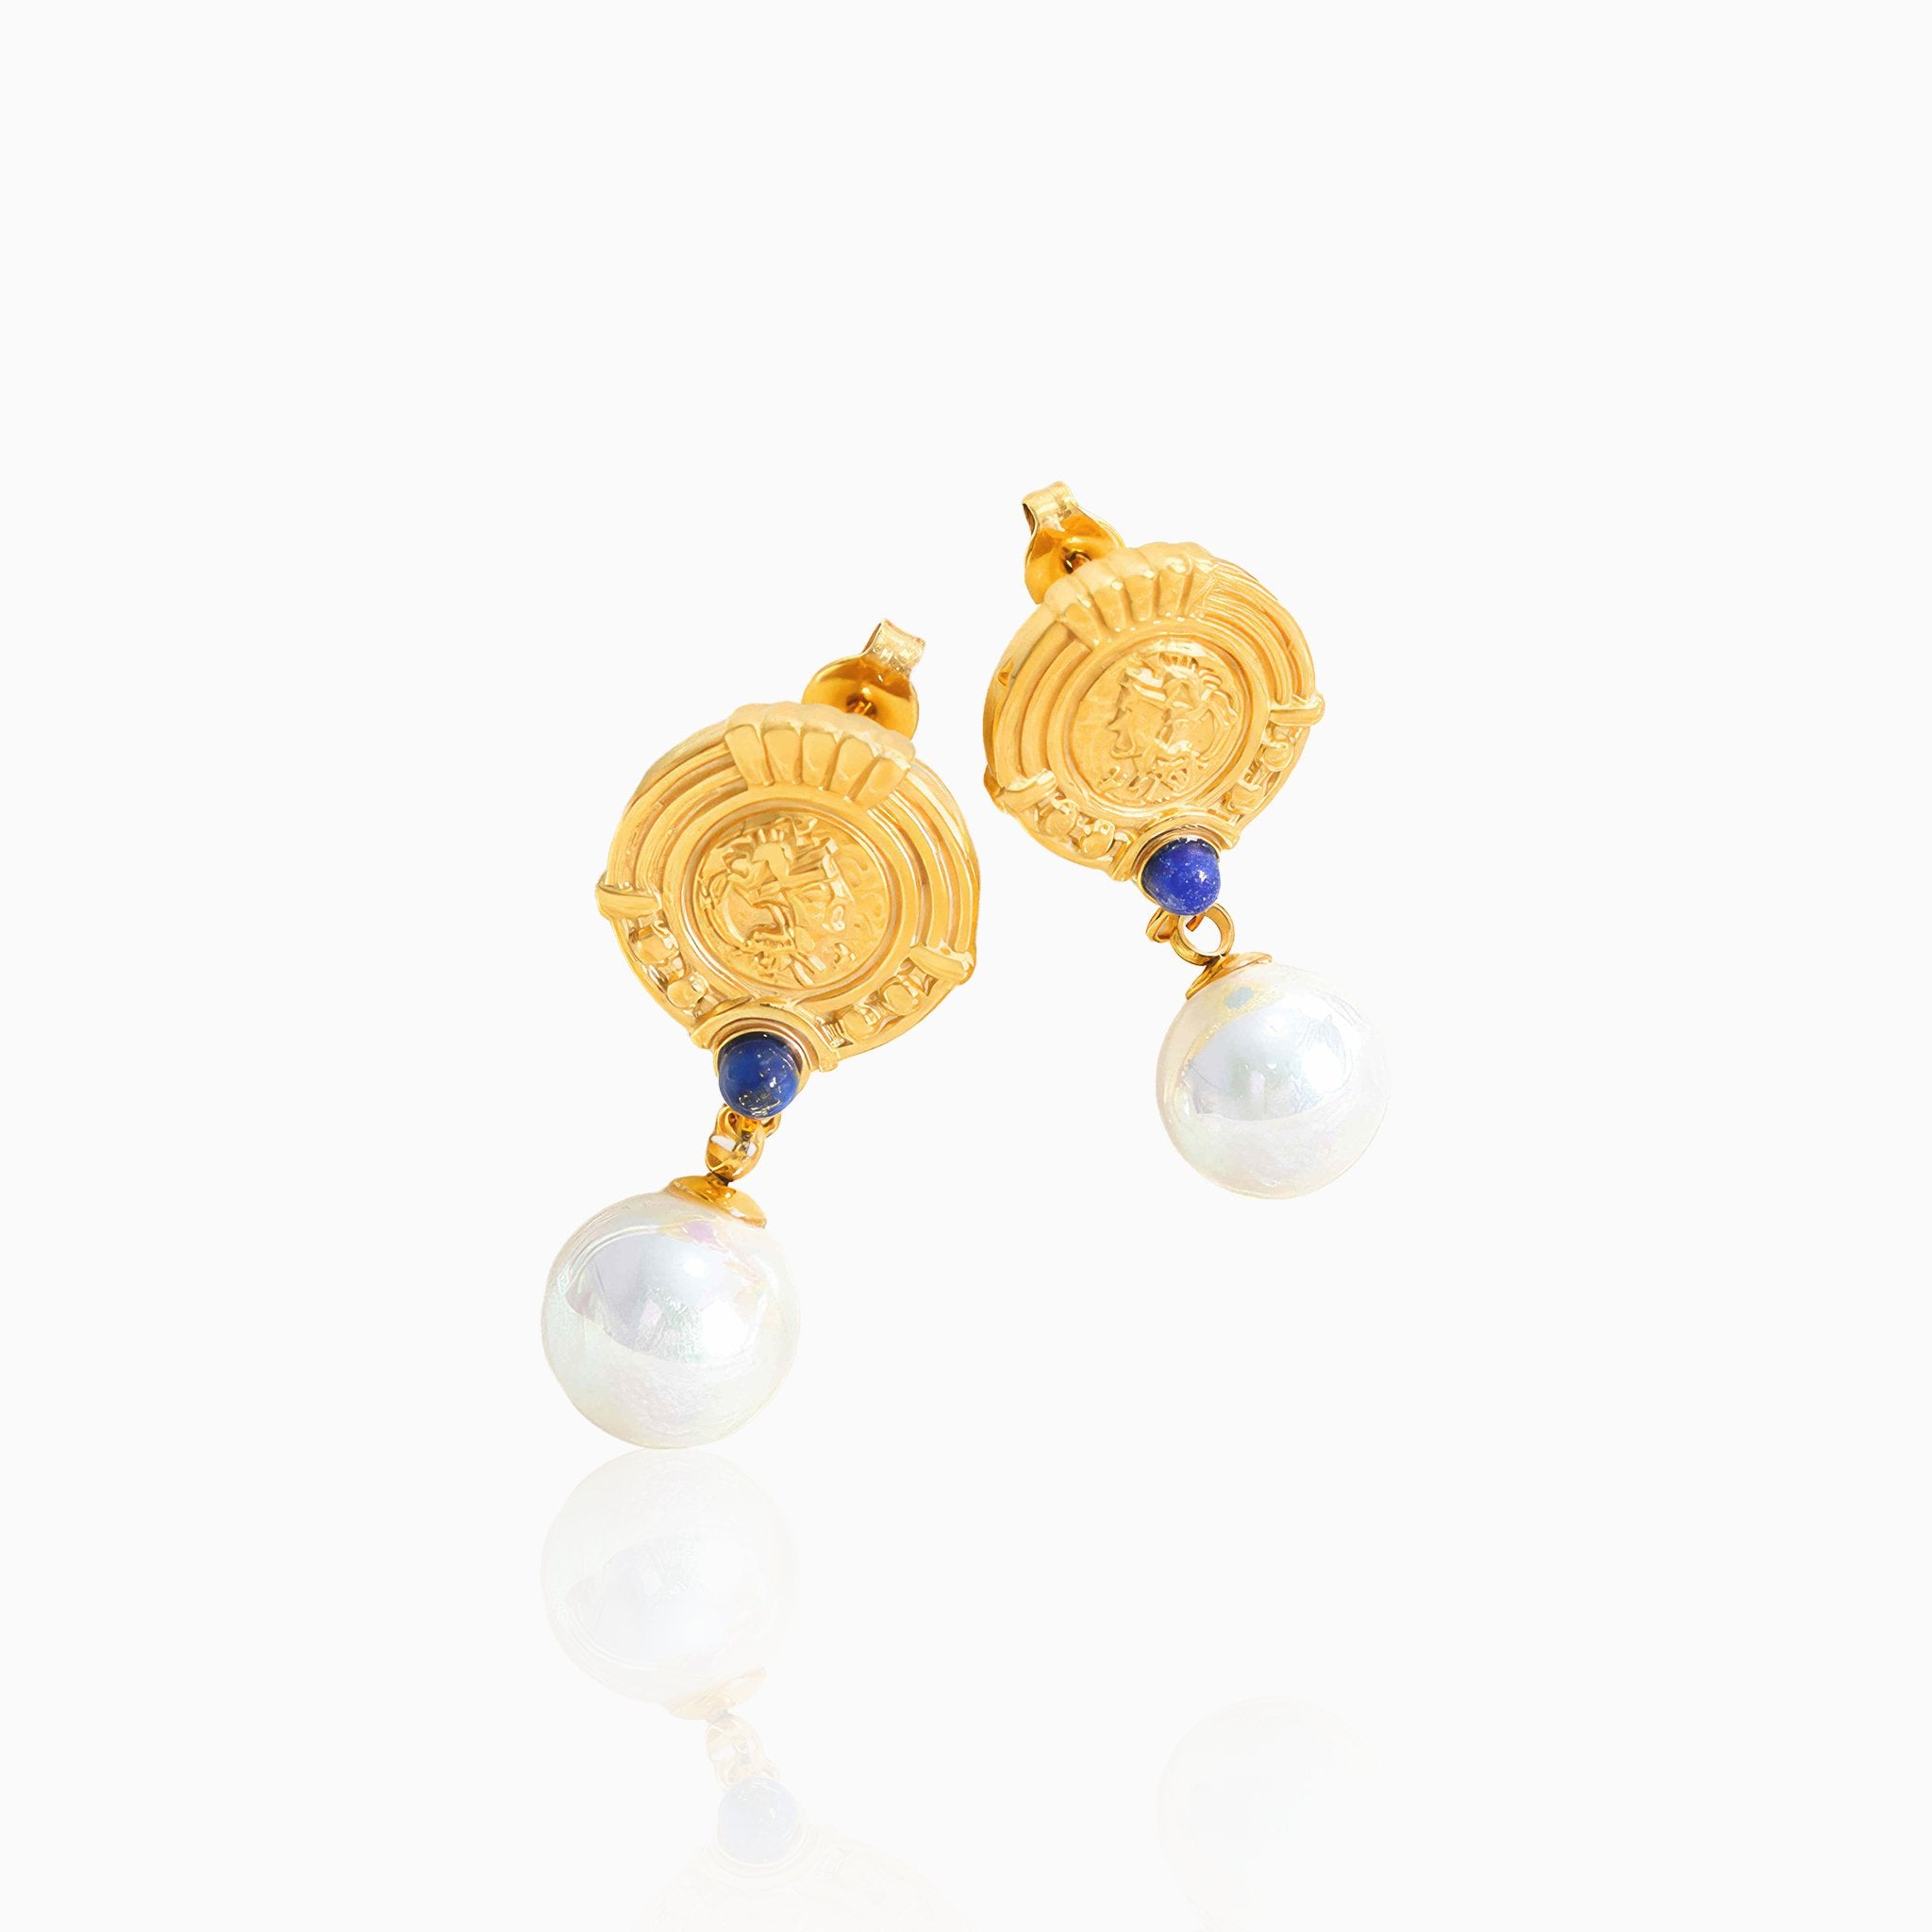 Circle Plaque Earrings with Pearl Accents - Nobbier - Earrings - 18K Gold And Titanium PVD Coated Jewelry